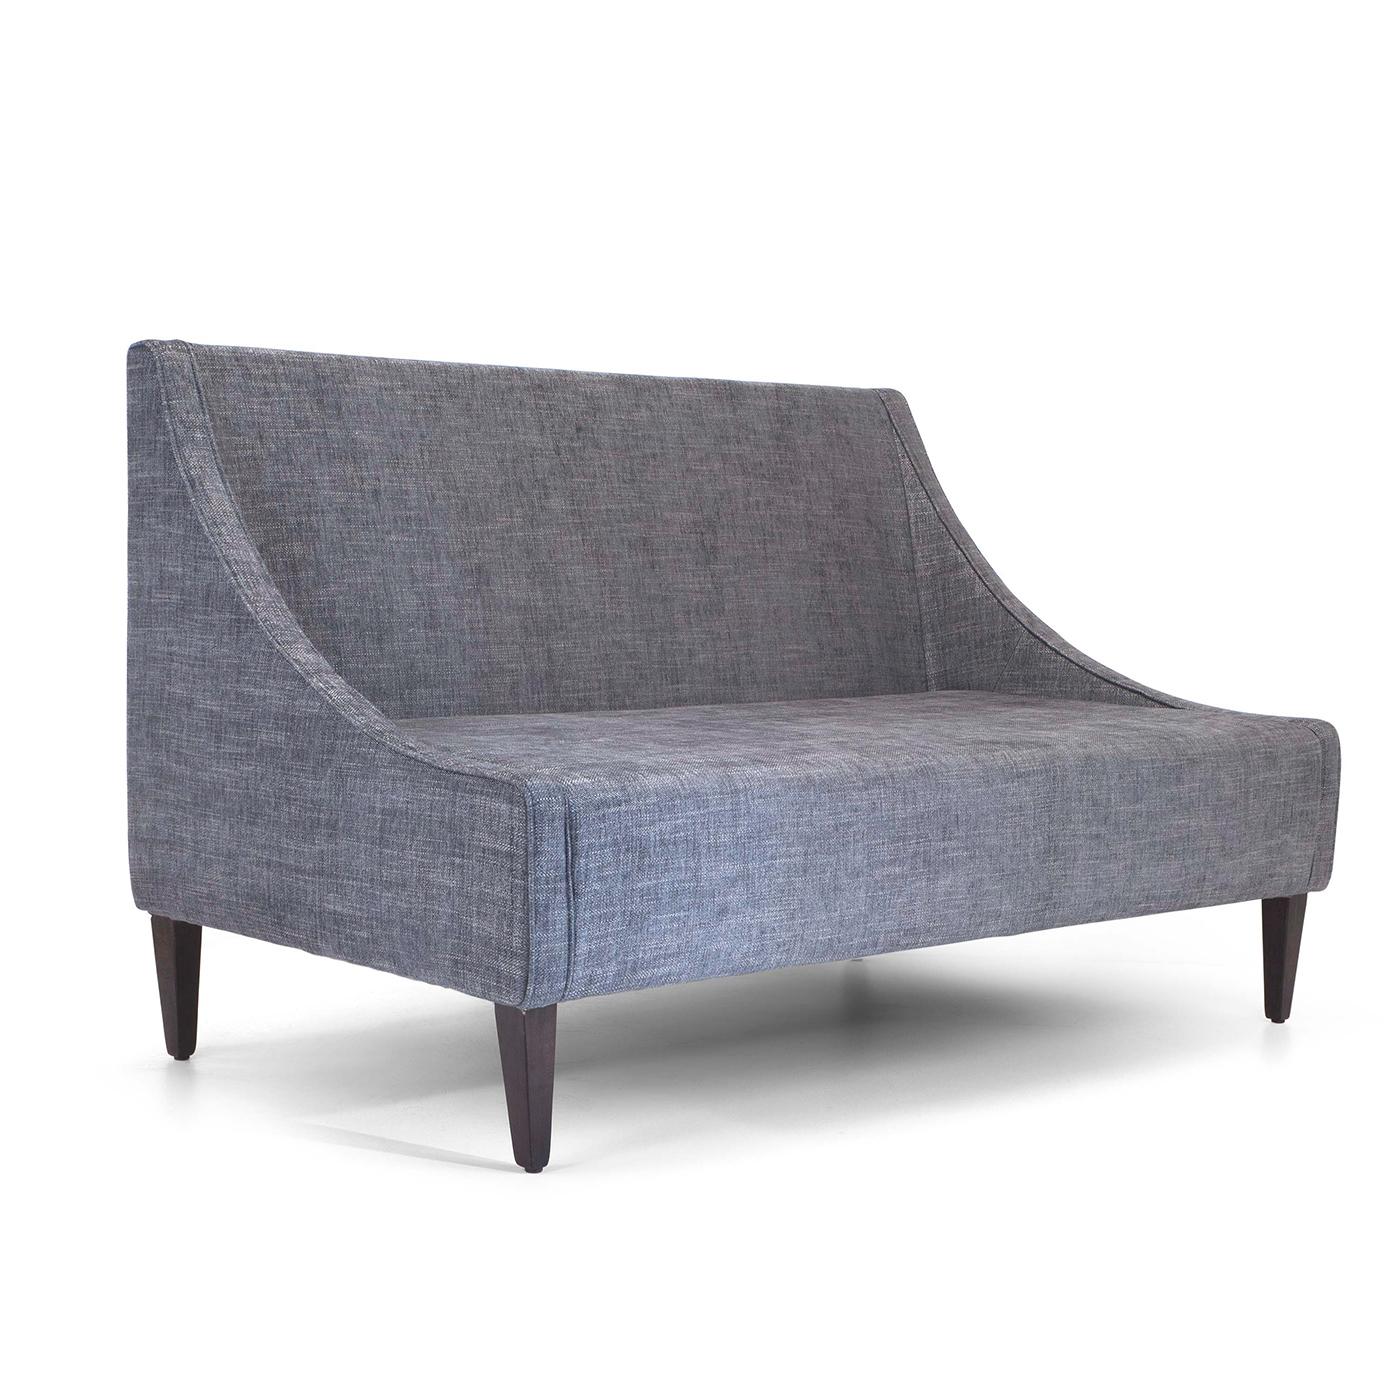 A testament to timeless style, durability, and comfort, this graceful sofa exude elegance with its Dacron upholstery in a sophisticated gray hue. Supported by wenge-stained wooden legs, the polyurethane-padded plywood frame showcases gently curved